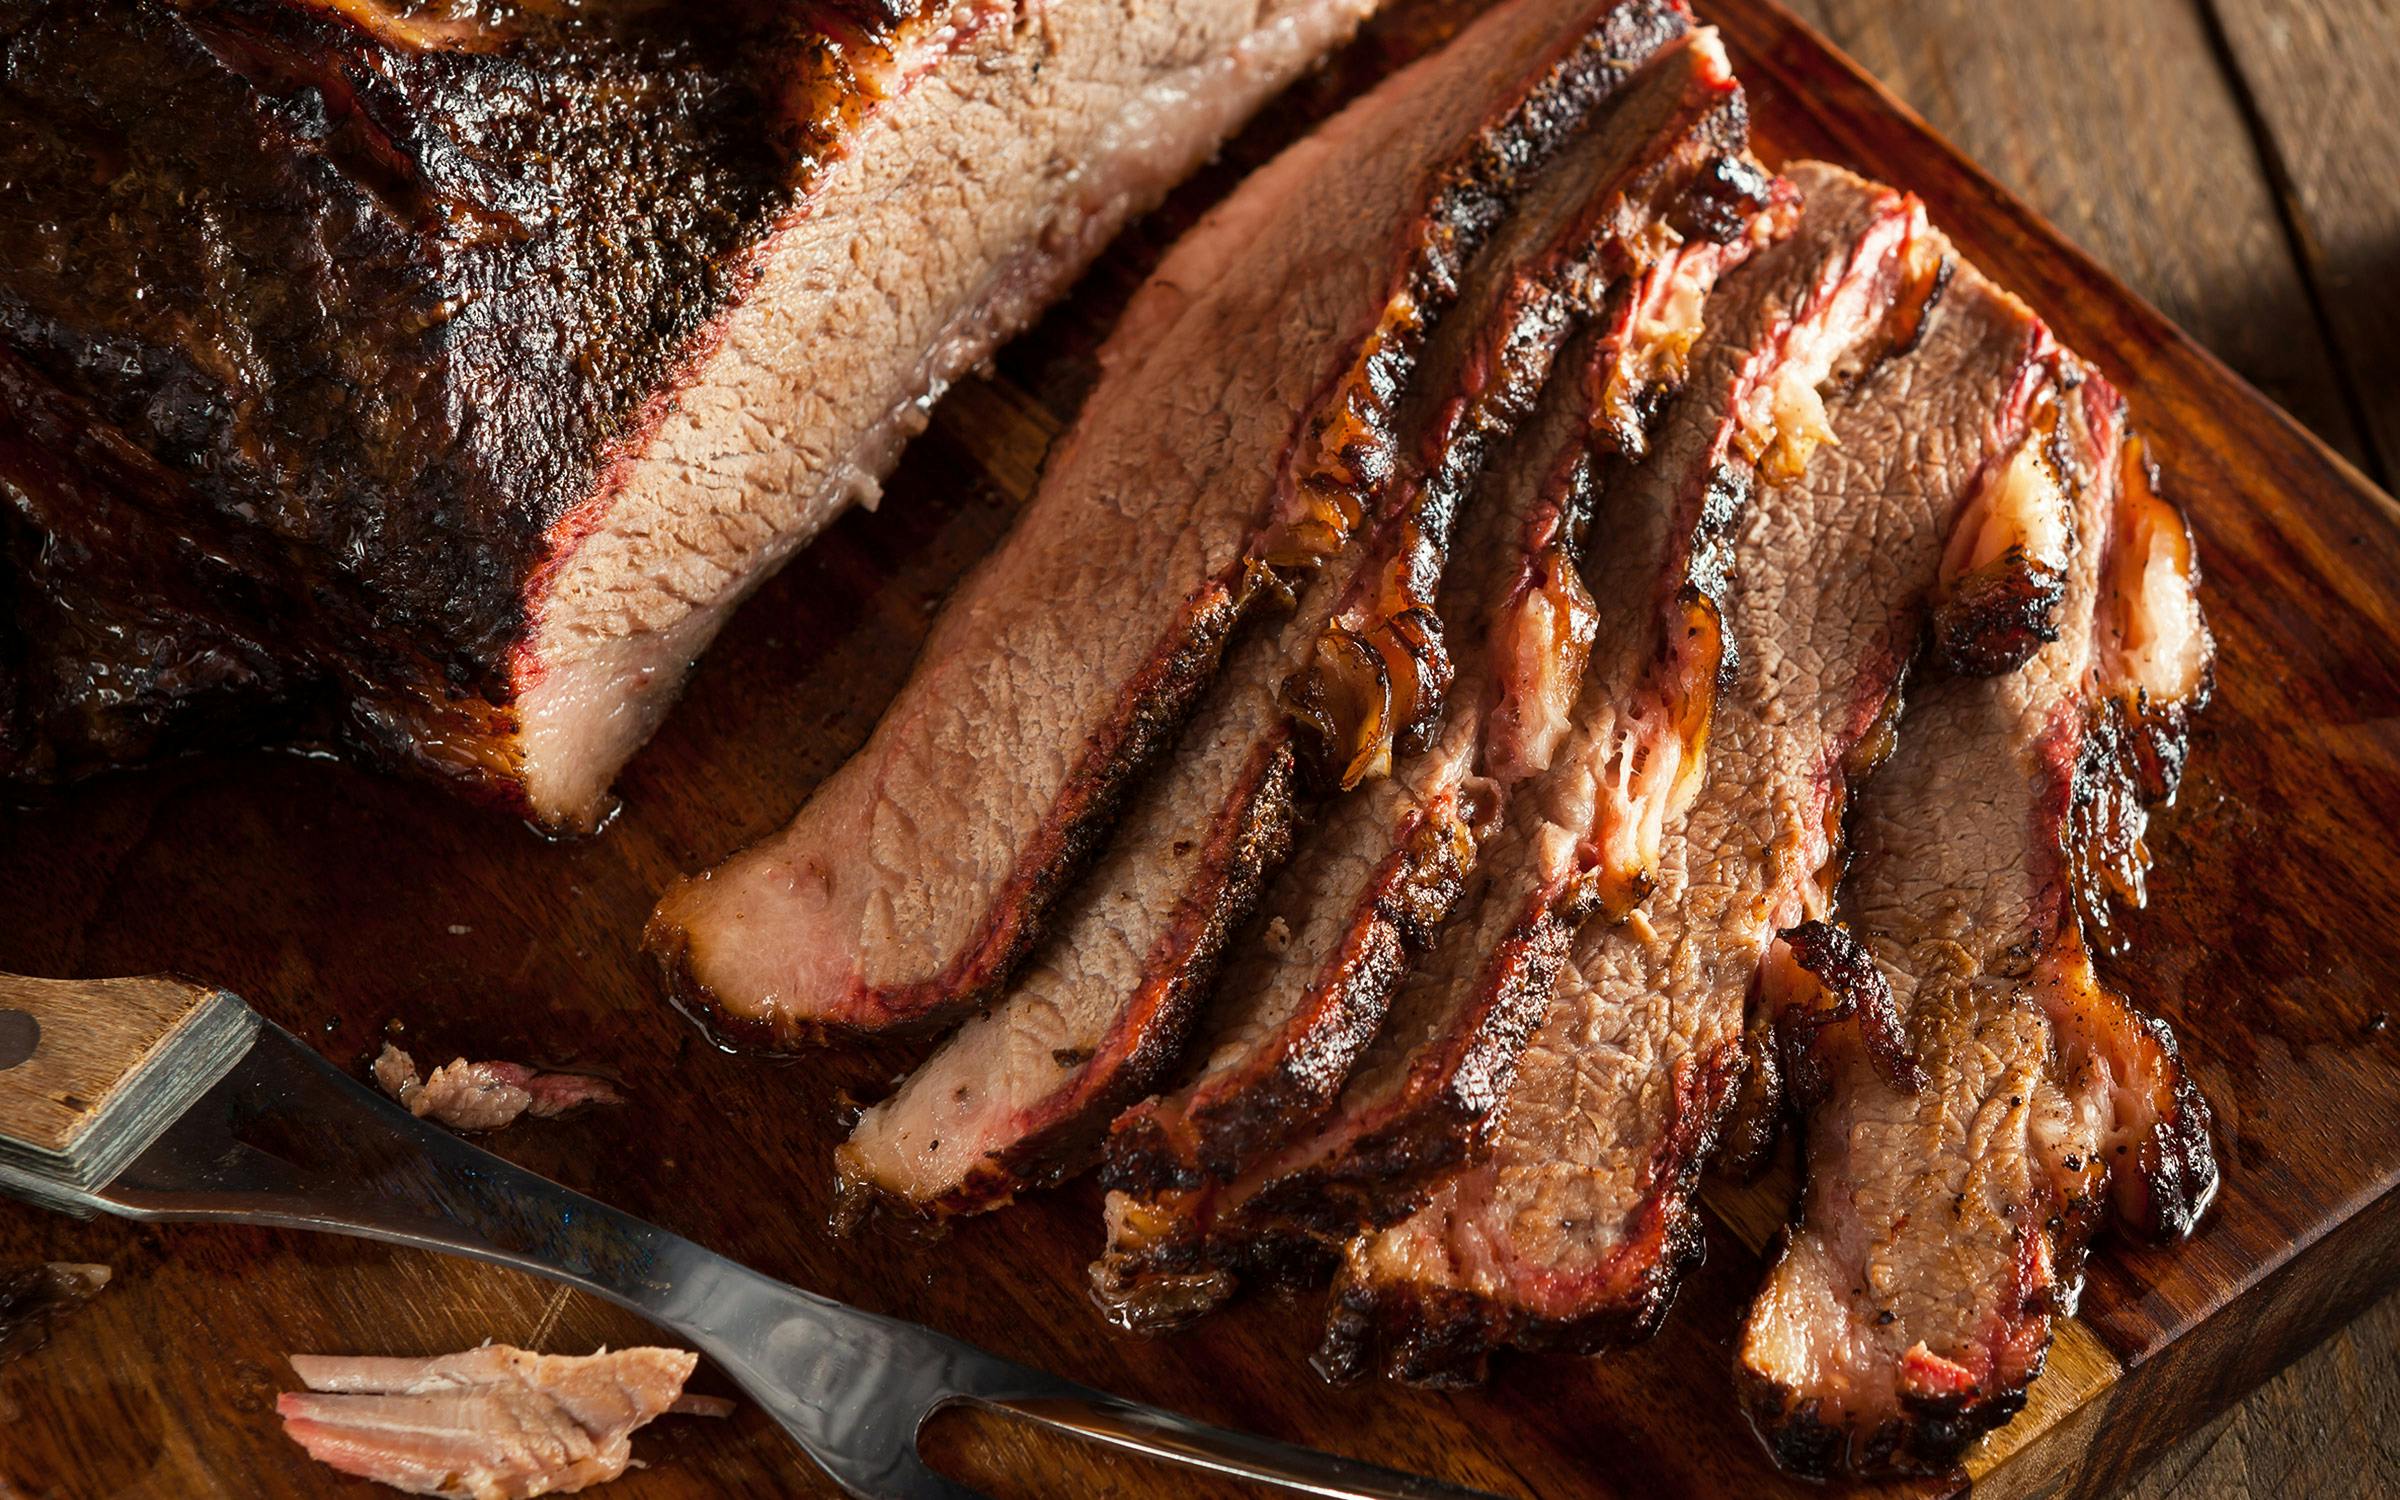 https://img.texasmonthly.com/2022/05/how-to-smoke-the-perfect-brisket.jpg?auto=compress&crop=faces&fit=fit&fm=pjpg&ixlib=php-3.3.1&q=45